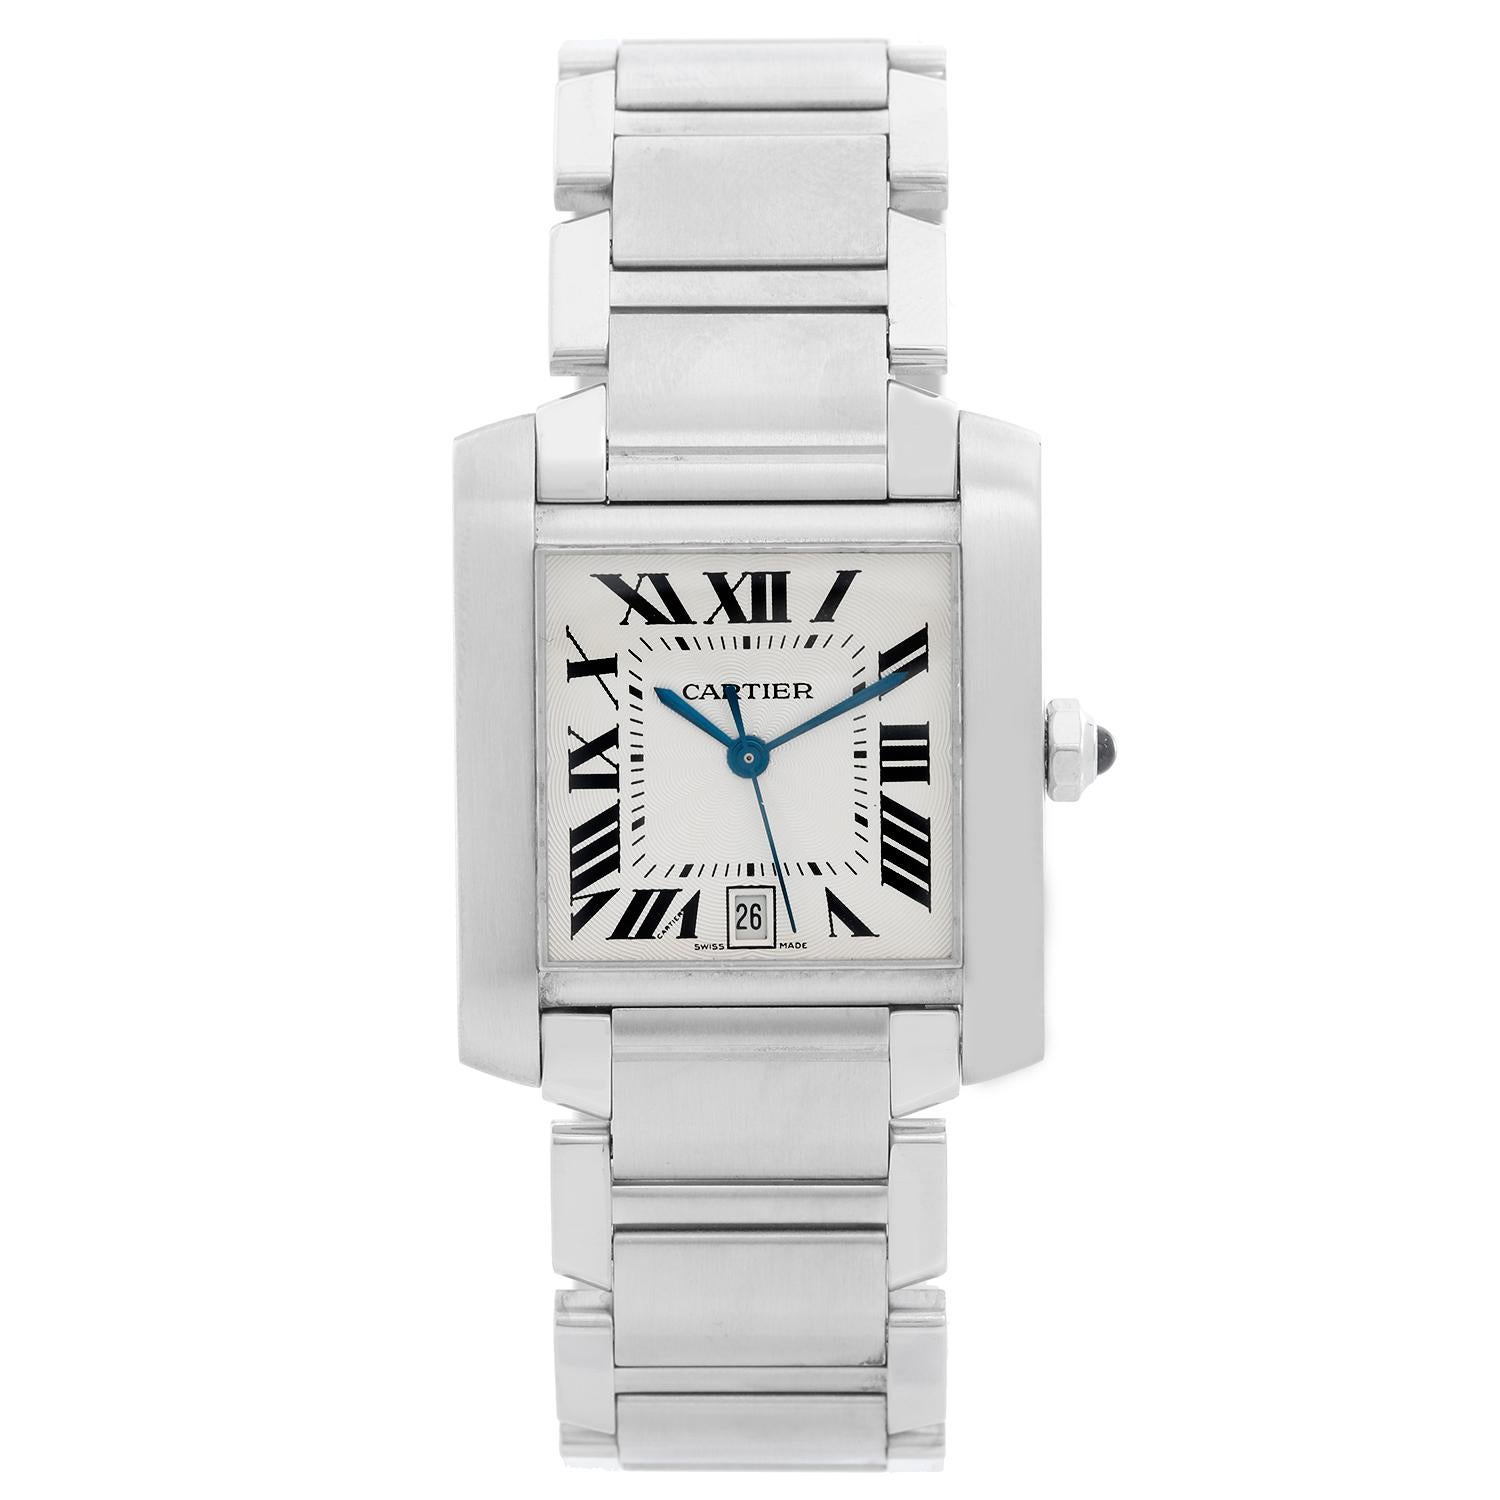 Cartier Tank Francaise Automatic Stainless Steel Watch W51002Q3